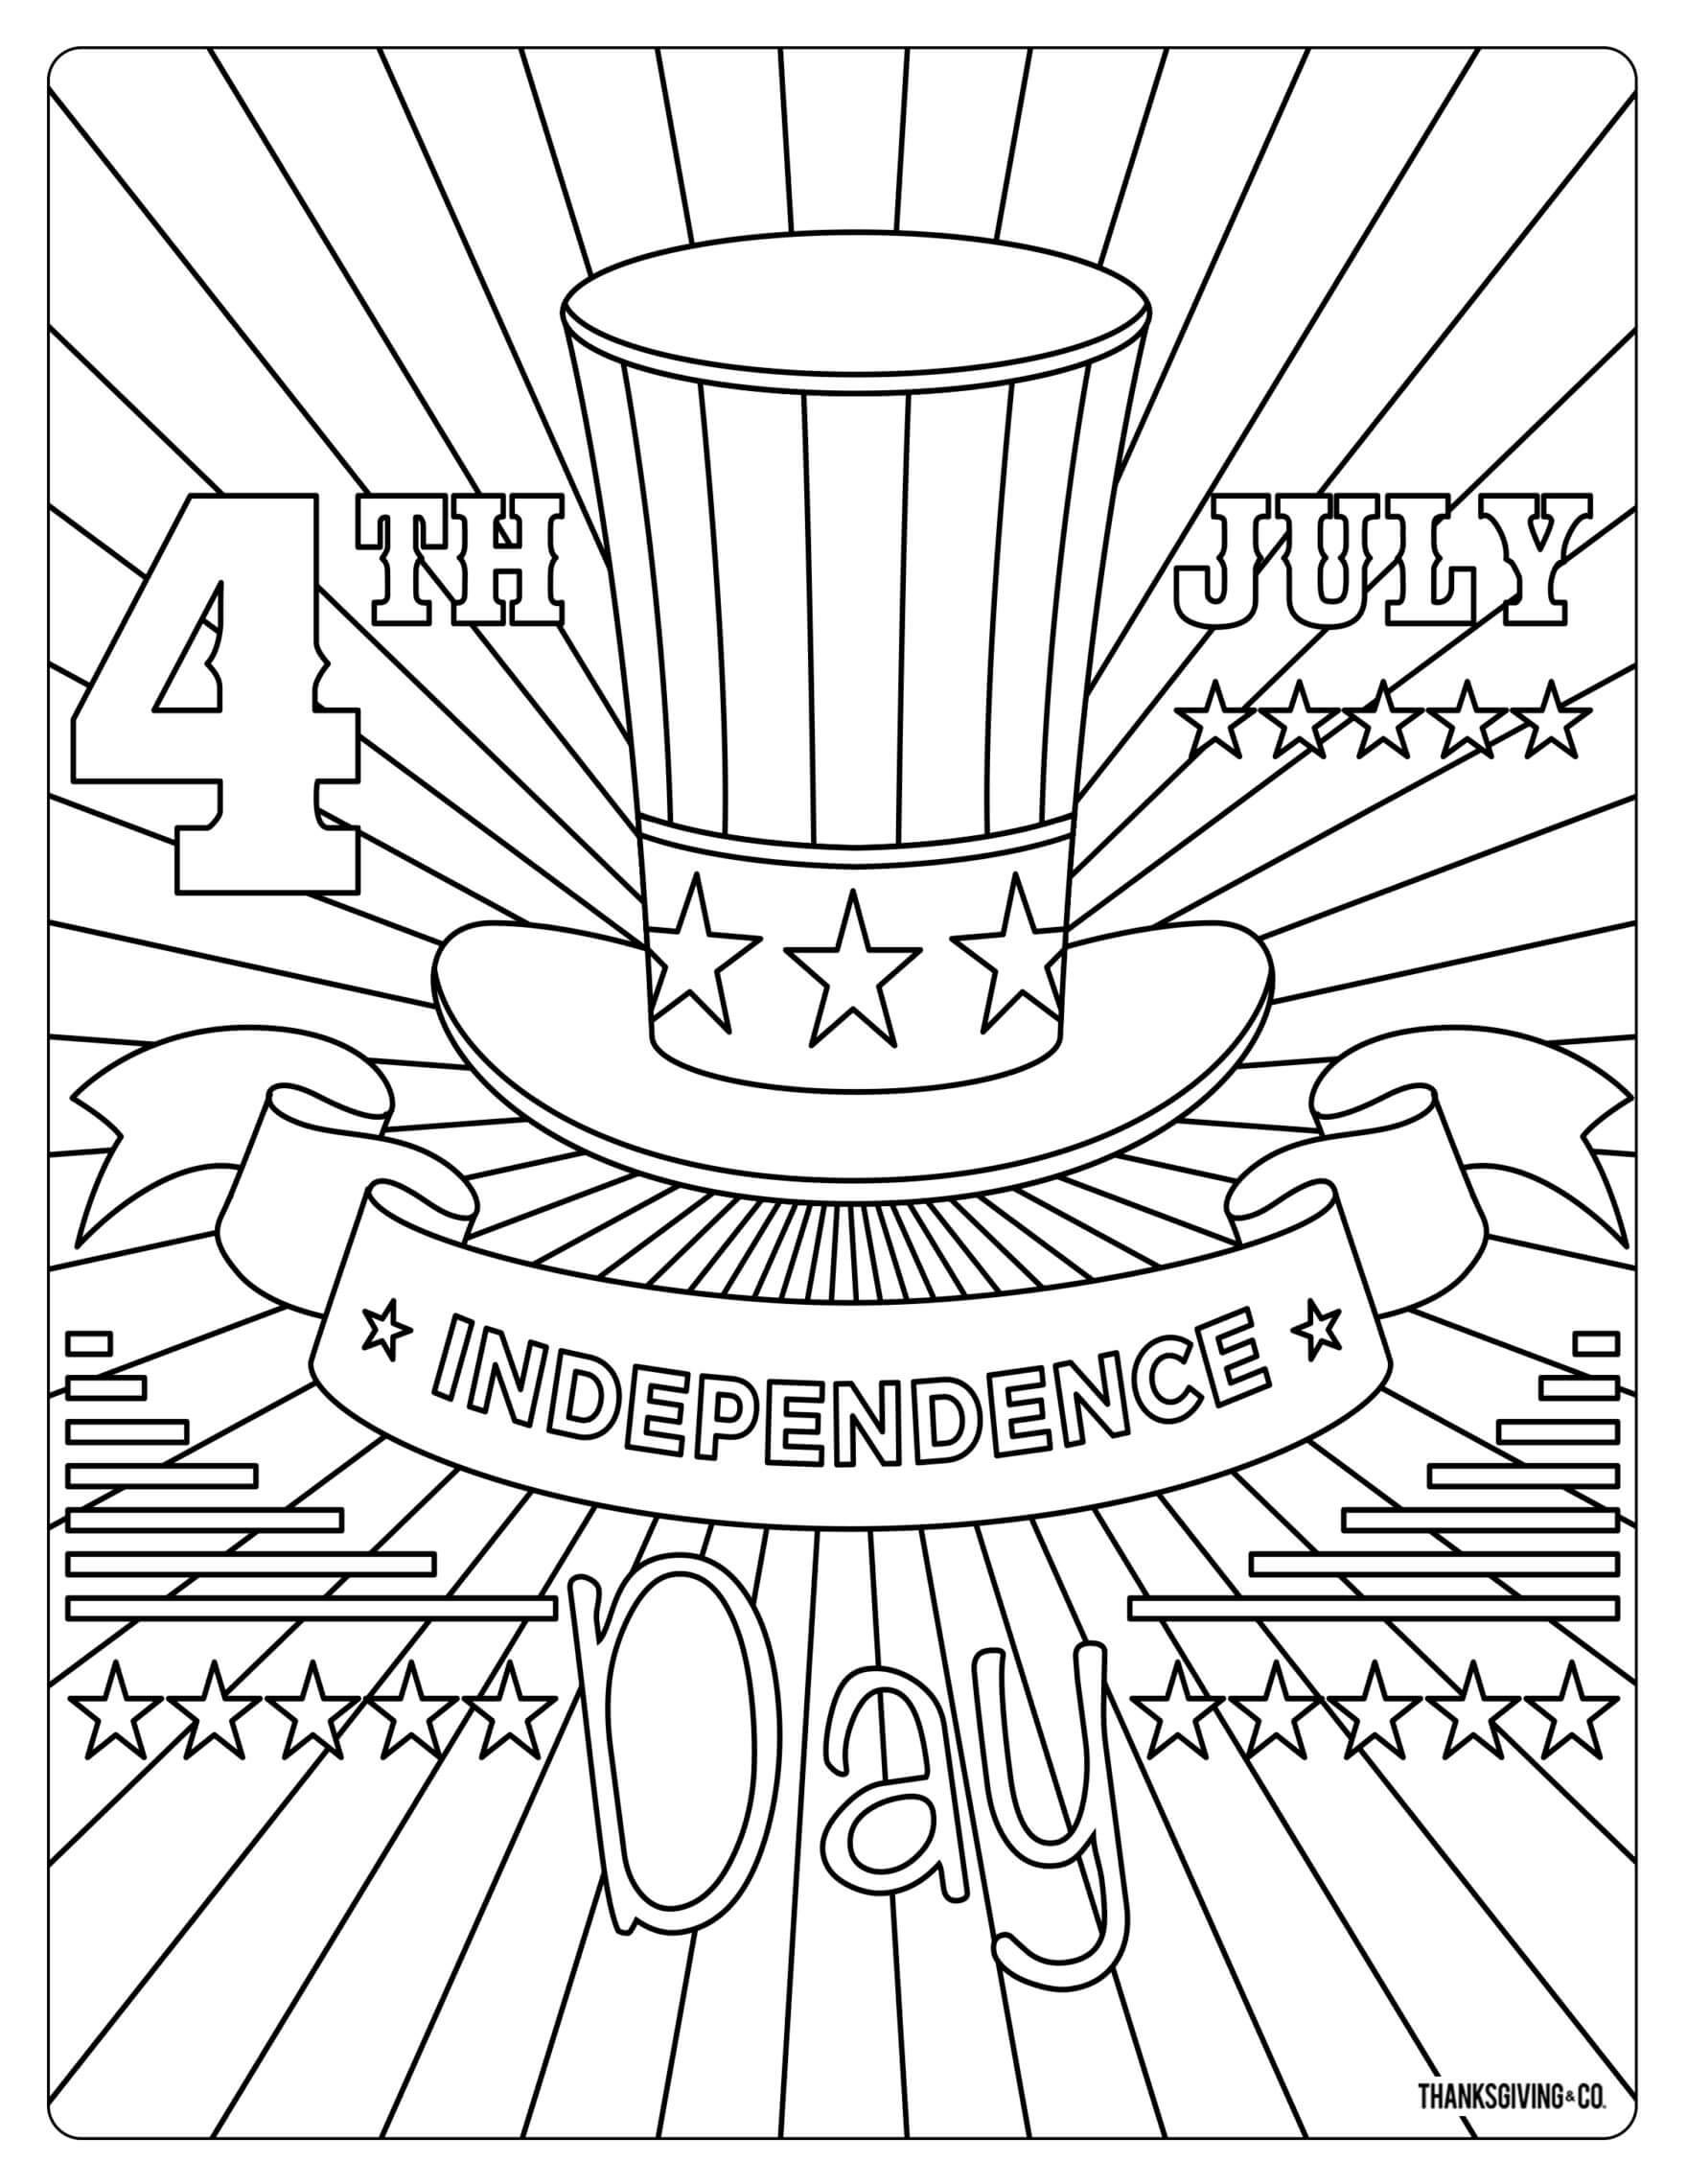 happy 4th of july coloring pages | disney 4th of july coloring pages | 4th july coloring pages